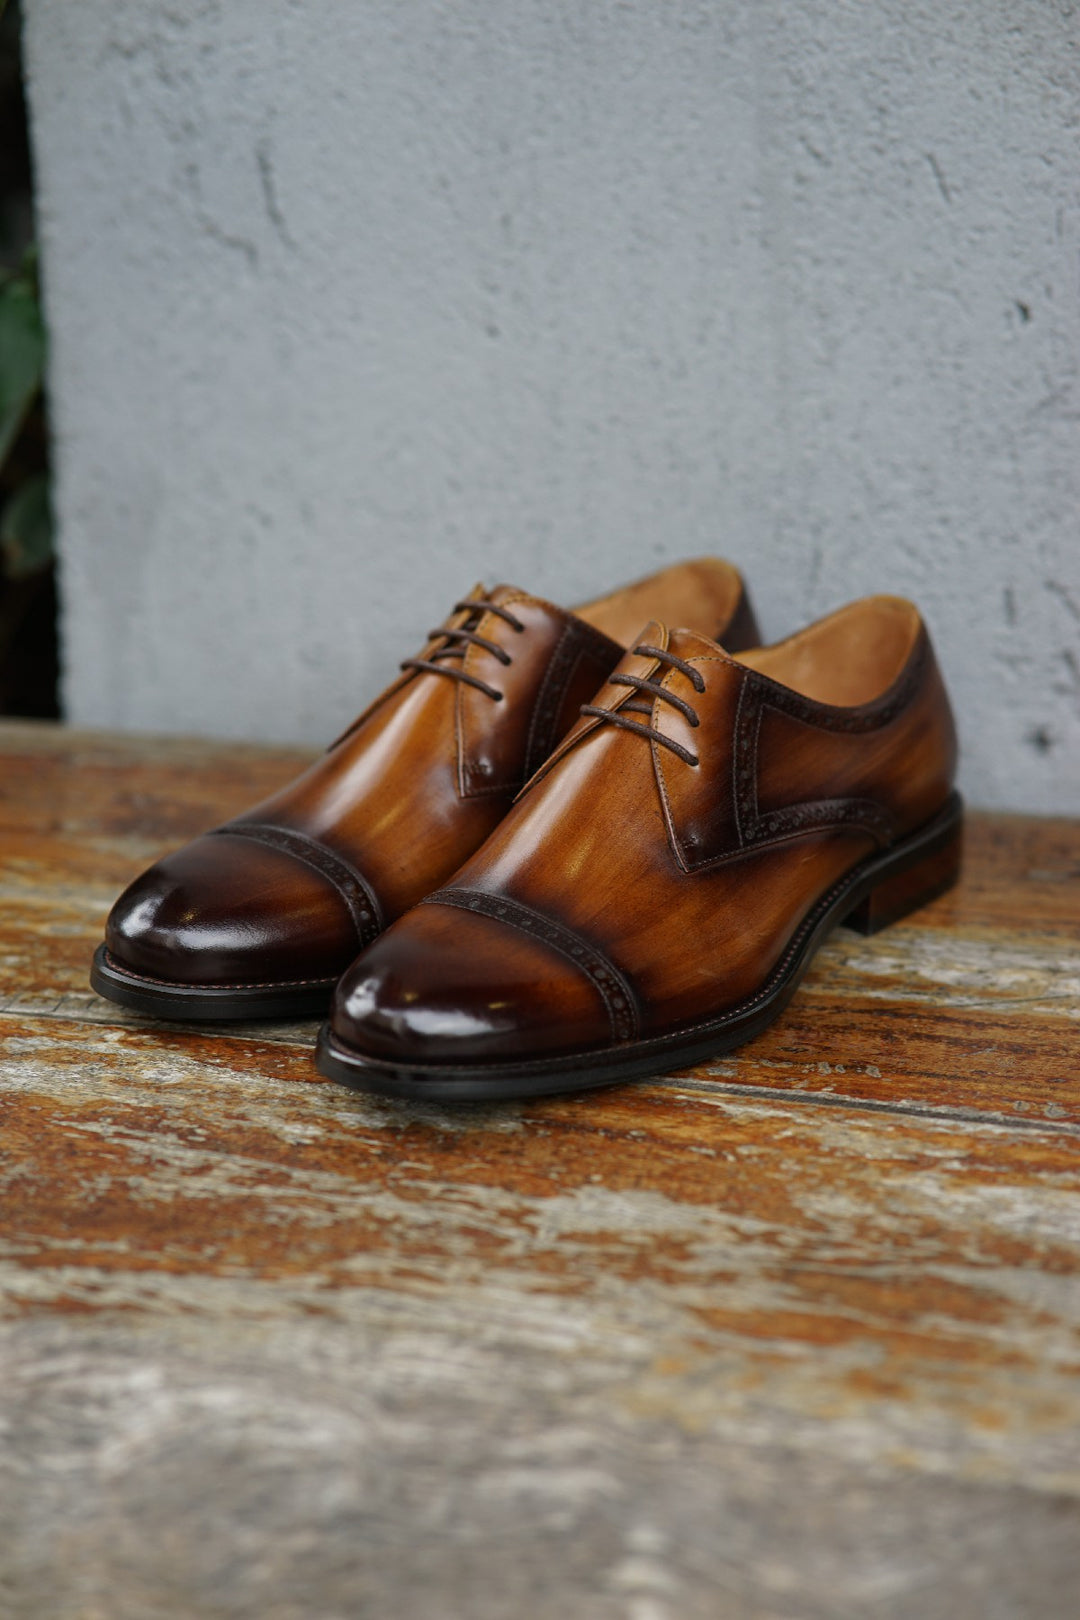 MenStyleWith Cap Toe Quarter Brogue Derby Shoes MW-B602